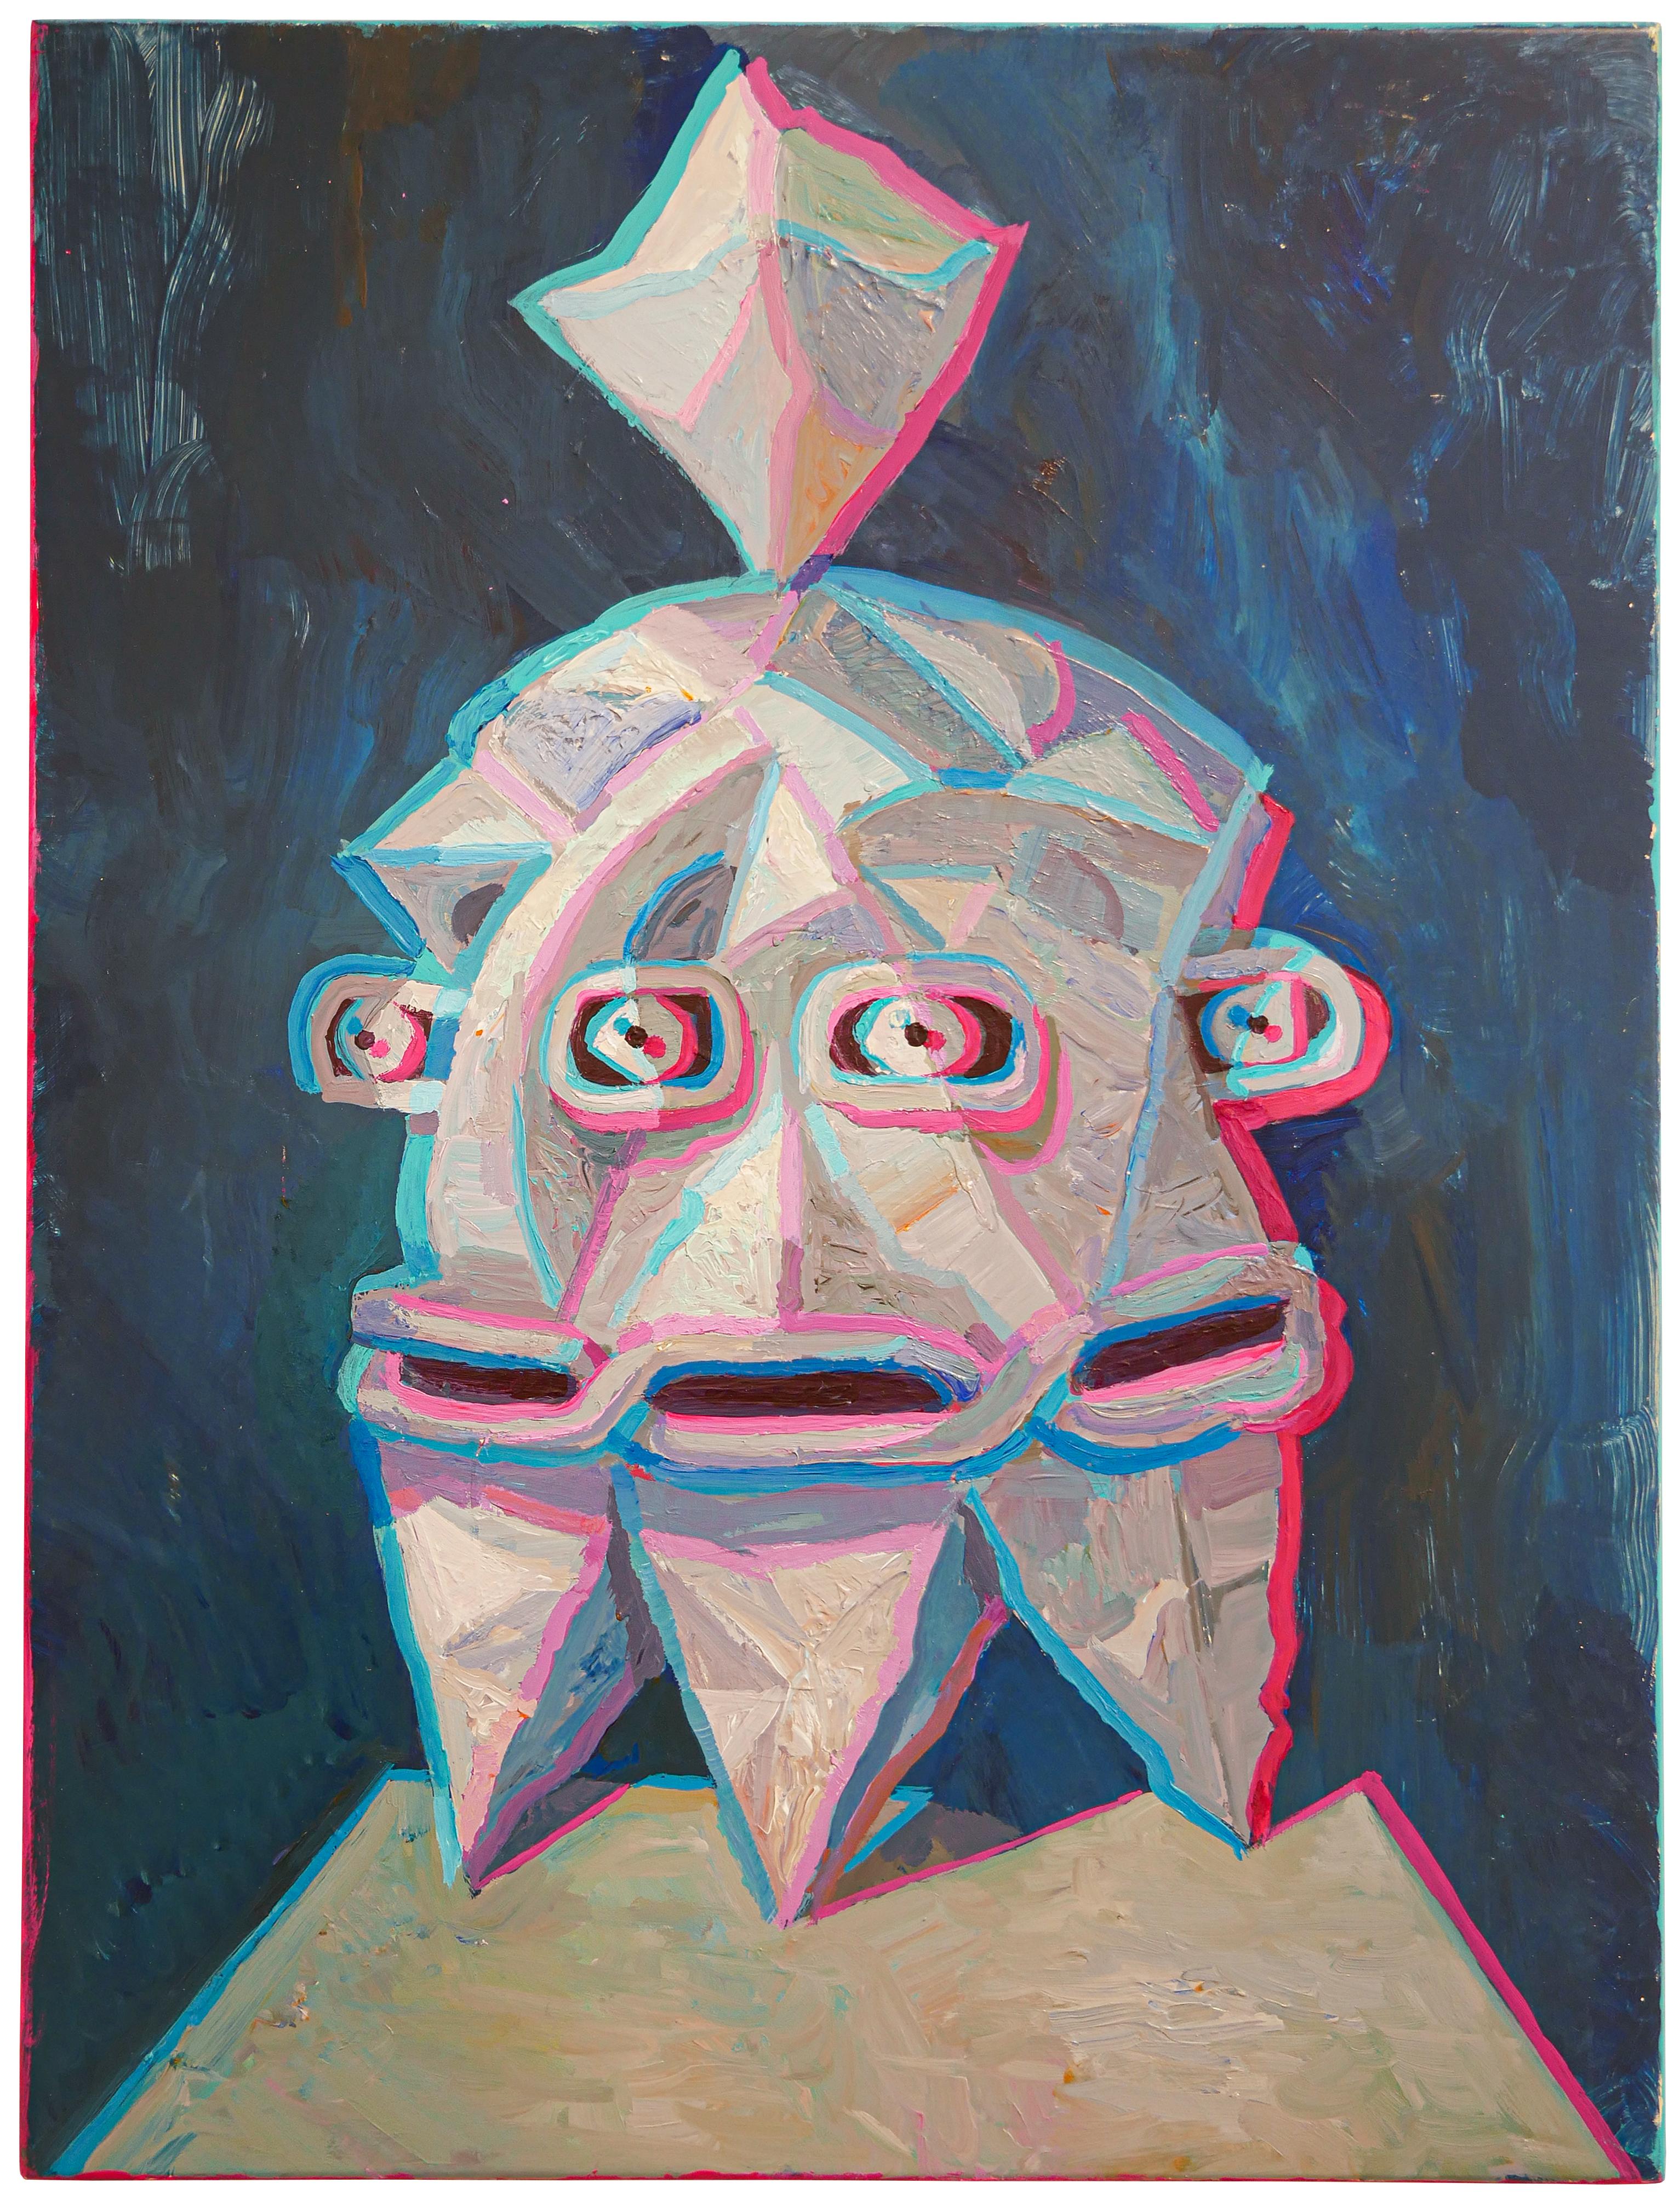 Robert MacKenzie Figurative Painting - "Untitled" Dark Blue, Neon Pink, and White Anaglyph Painting